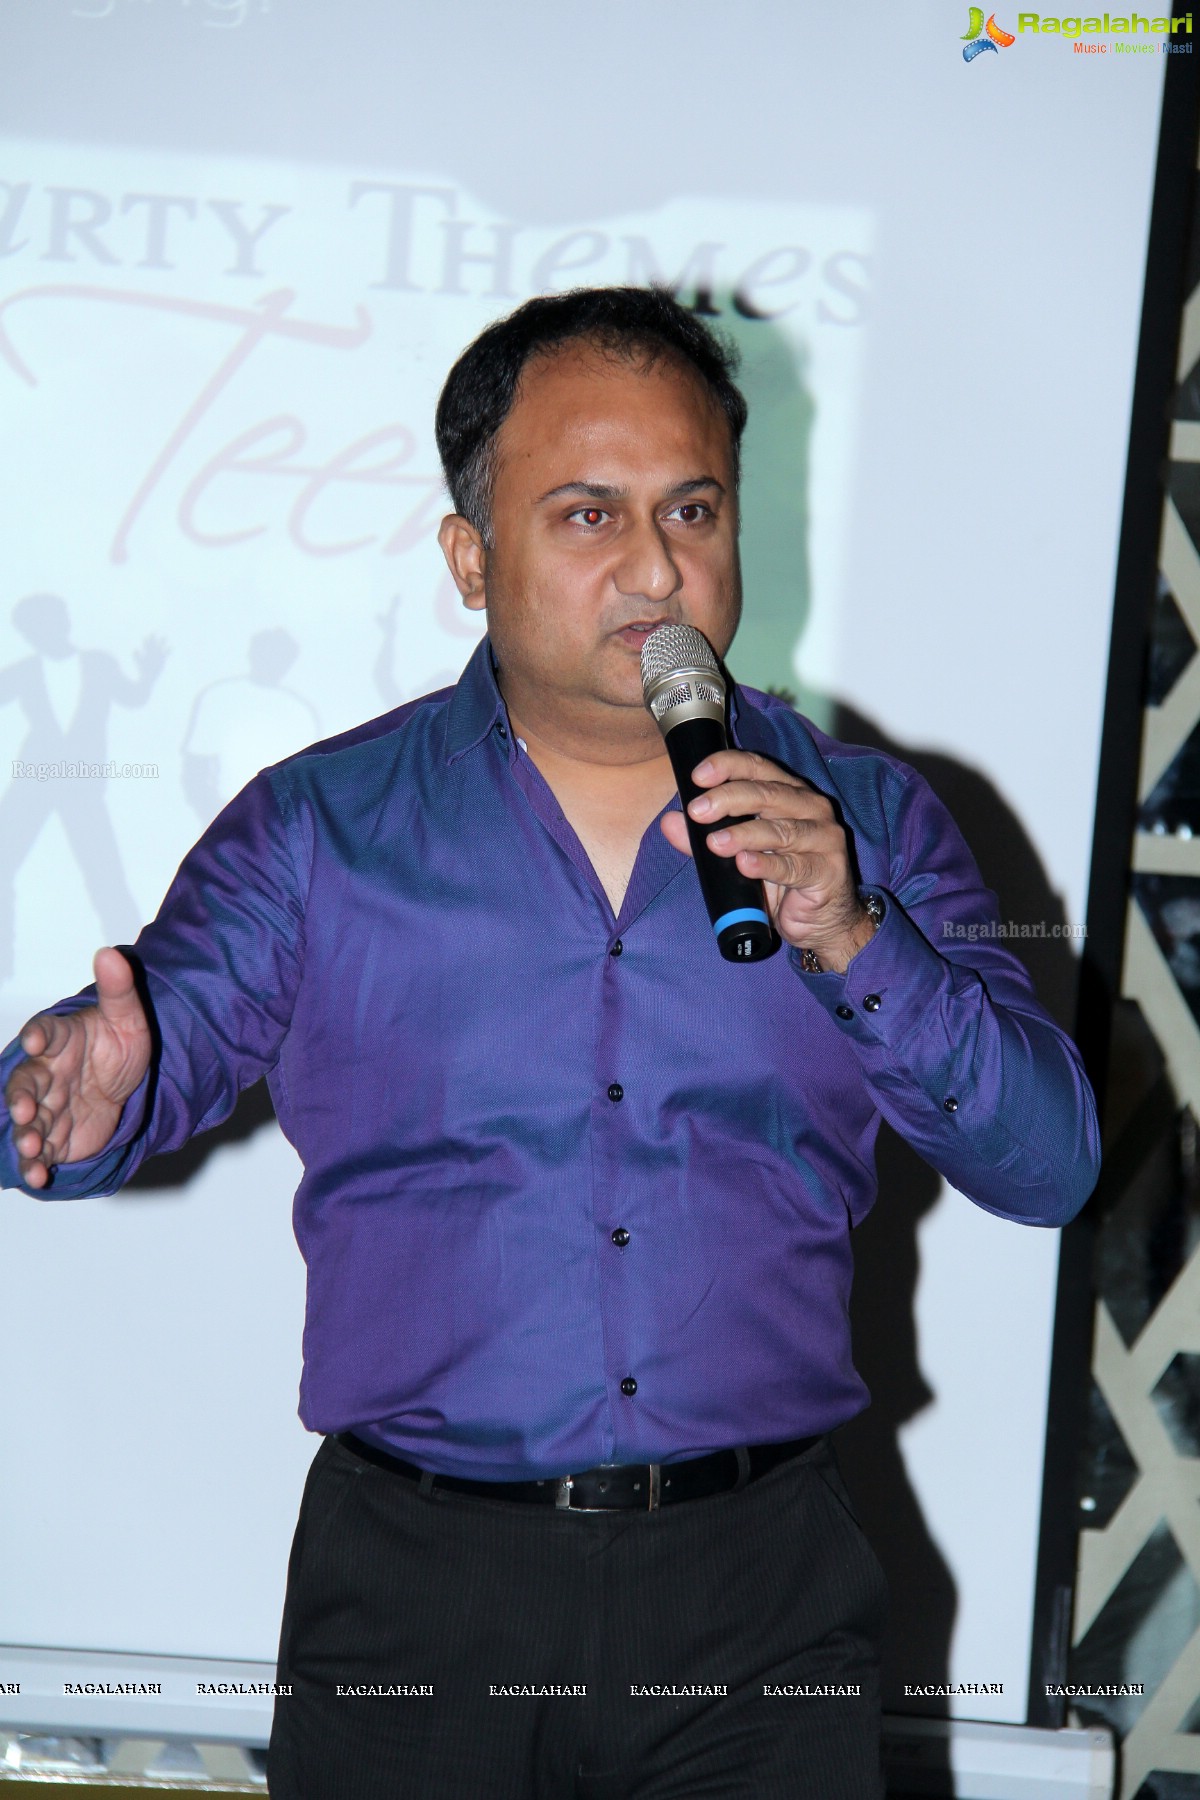 Lektrif Clubbing App Launch Party at The Park, Hyderabad